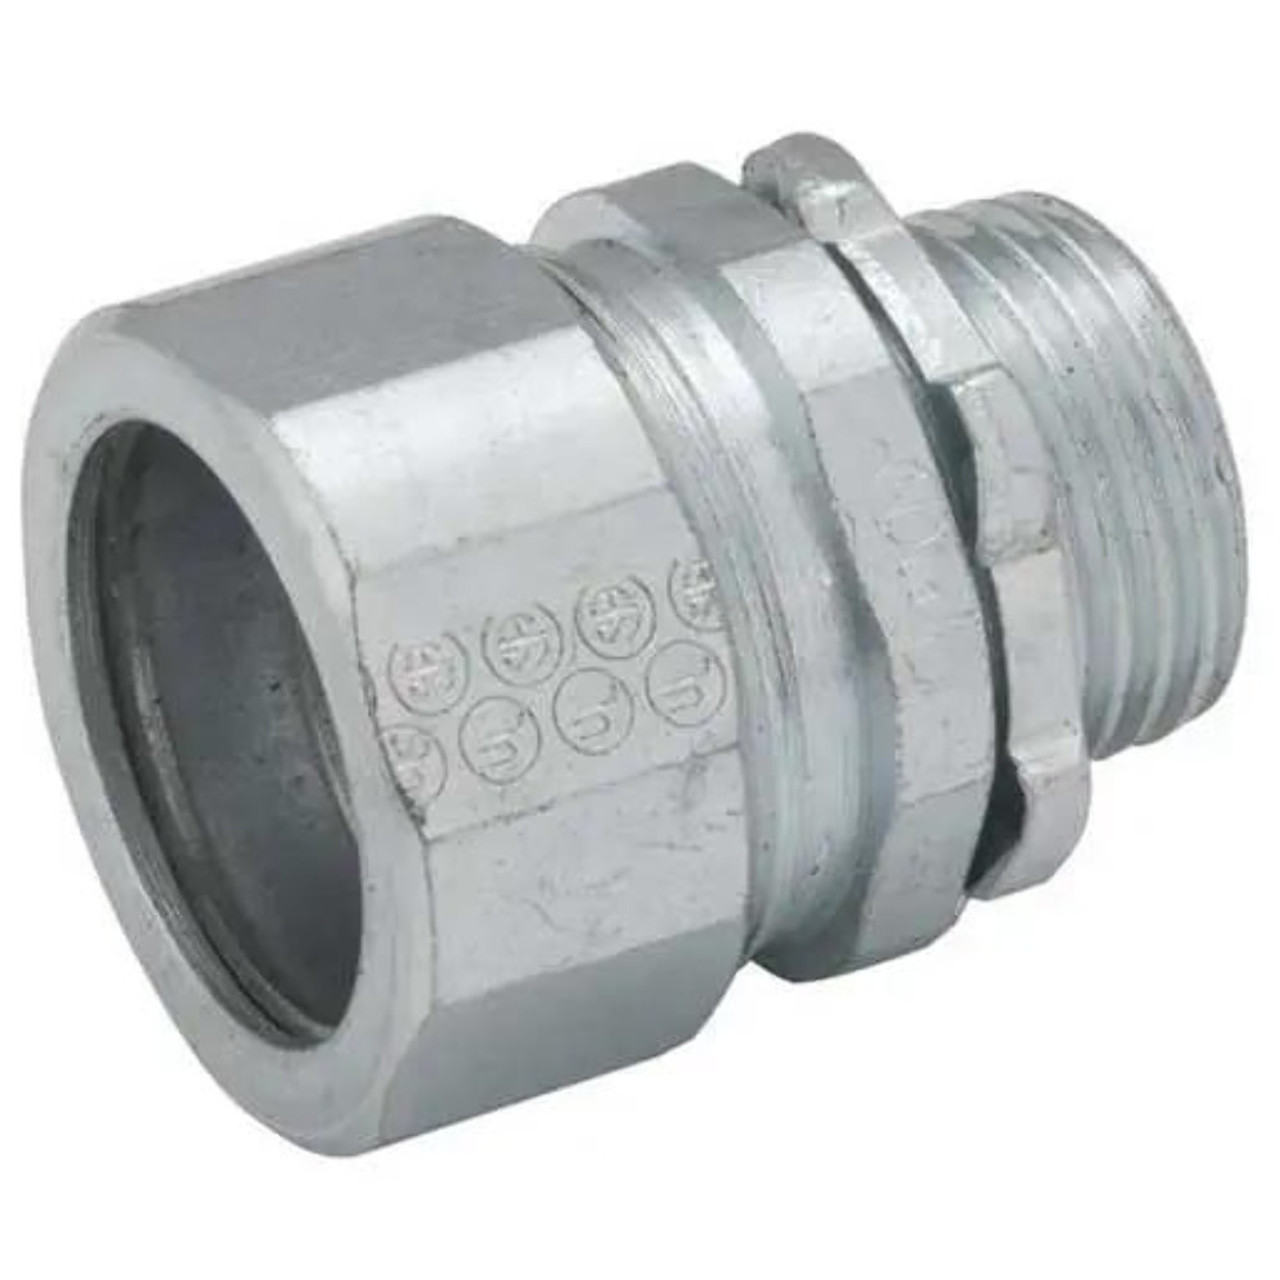 Raco 1804 Compression Connector Conduit  1" Uninsulated Steel